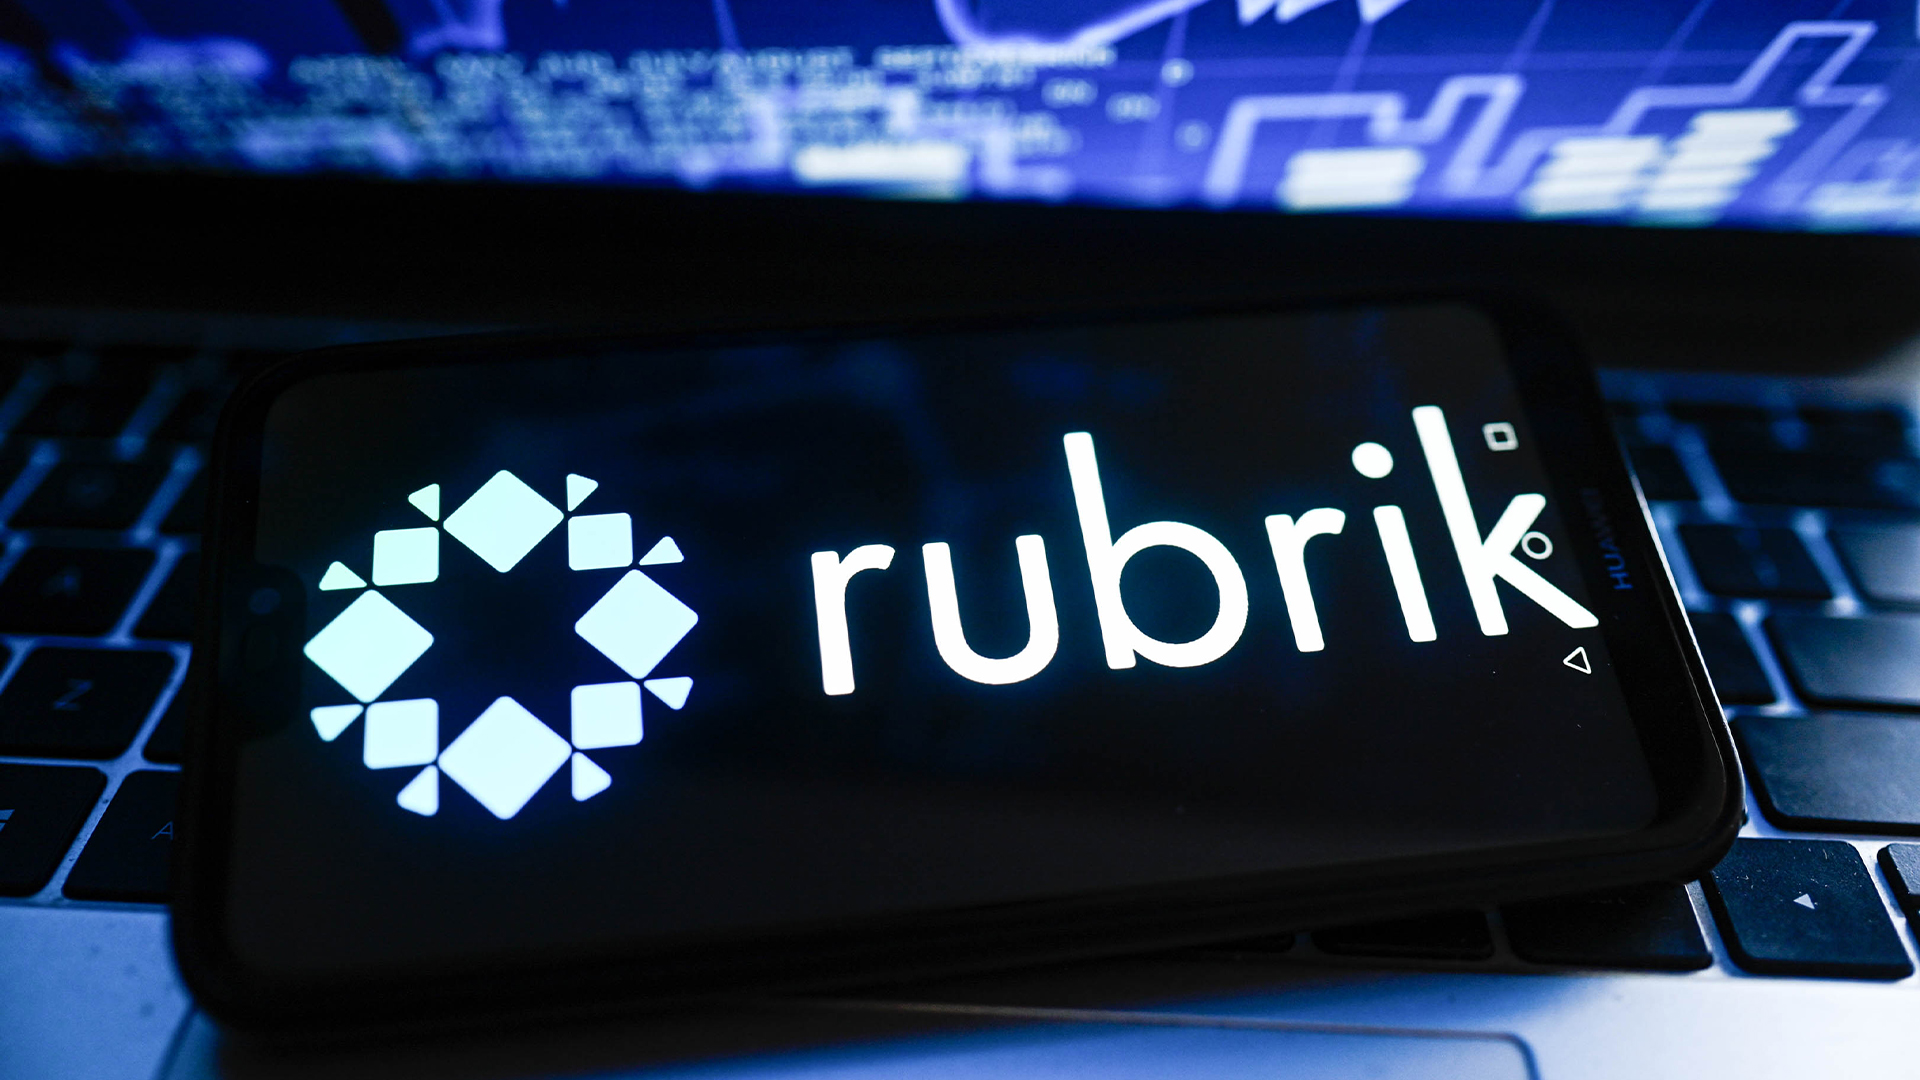 Rubrik IPO Plans Show Growing Appetite for Data Protection Solutions